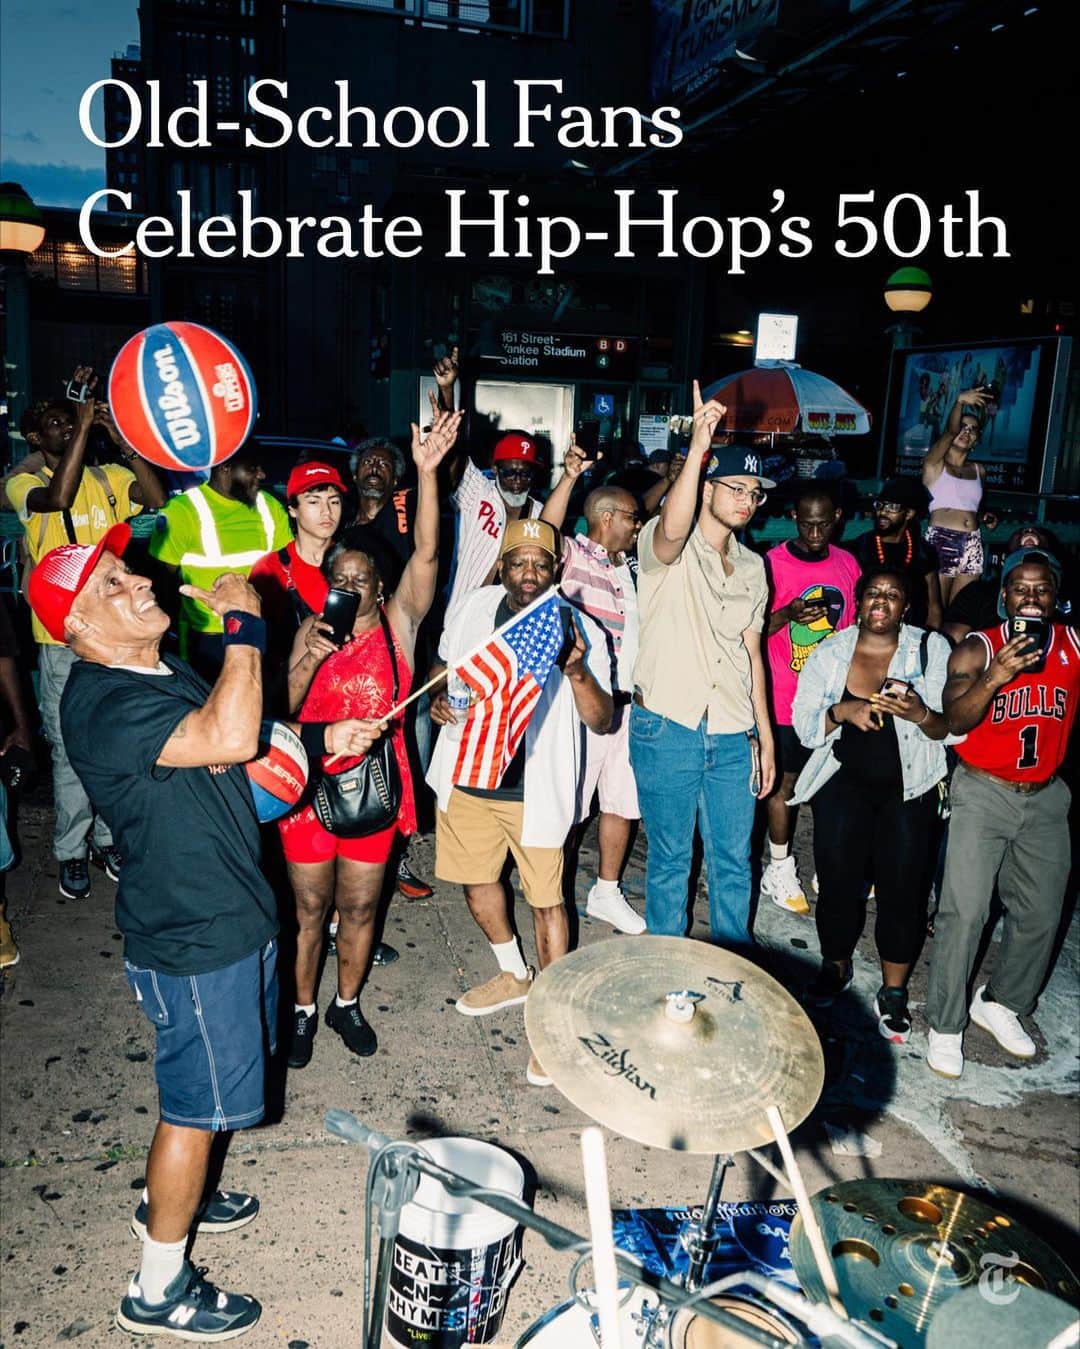 New York Times Fashionのインスタグラム：「The start of hip-hop dates to Aug. 11, 1973, when DJ Kool Herc created continuous break-beats by working two turntables during a party in a rec room at 1520 Sedgwick Ave in the Bronx. On Friday night, exactly 50 years later, a concert was held at Yankee Stadium — roughly a mile and a half from hip-hop’s birthplace — to honor the occasion, featuring Run-DMC, Slick Rick, Ice Cube, Snoop Dogg, Lil’ Kim and Nas. DJ Kool Herc, 68, also appeared onstage to accept an award.  Before the show, which was billed as “Hip Hop 50 Live,” the scene outside the stadium was heavy with fans of the sounds from the ’70s, ’80s and ’90s. Middle-aged couples on date nights arrived wearing matching Adidas track suits. A man strolled the promenade carrying a boombox and wearing a Kangol hat. Hawkers sold pins with pictures of Biz Markie and The Notorious B.I.G.  In interviews with The New York Times, attendees reflected on hip-hop’s 50th. Some recalled witnessing the park jams and parties that defined the genre’s beginnings. Tap the link in our bio to read more reflections on hip-hop and to see more looks from outside the show. Photos by @poupayphoto」